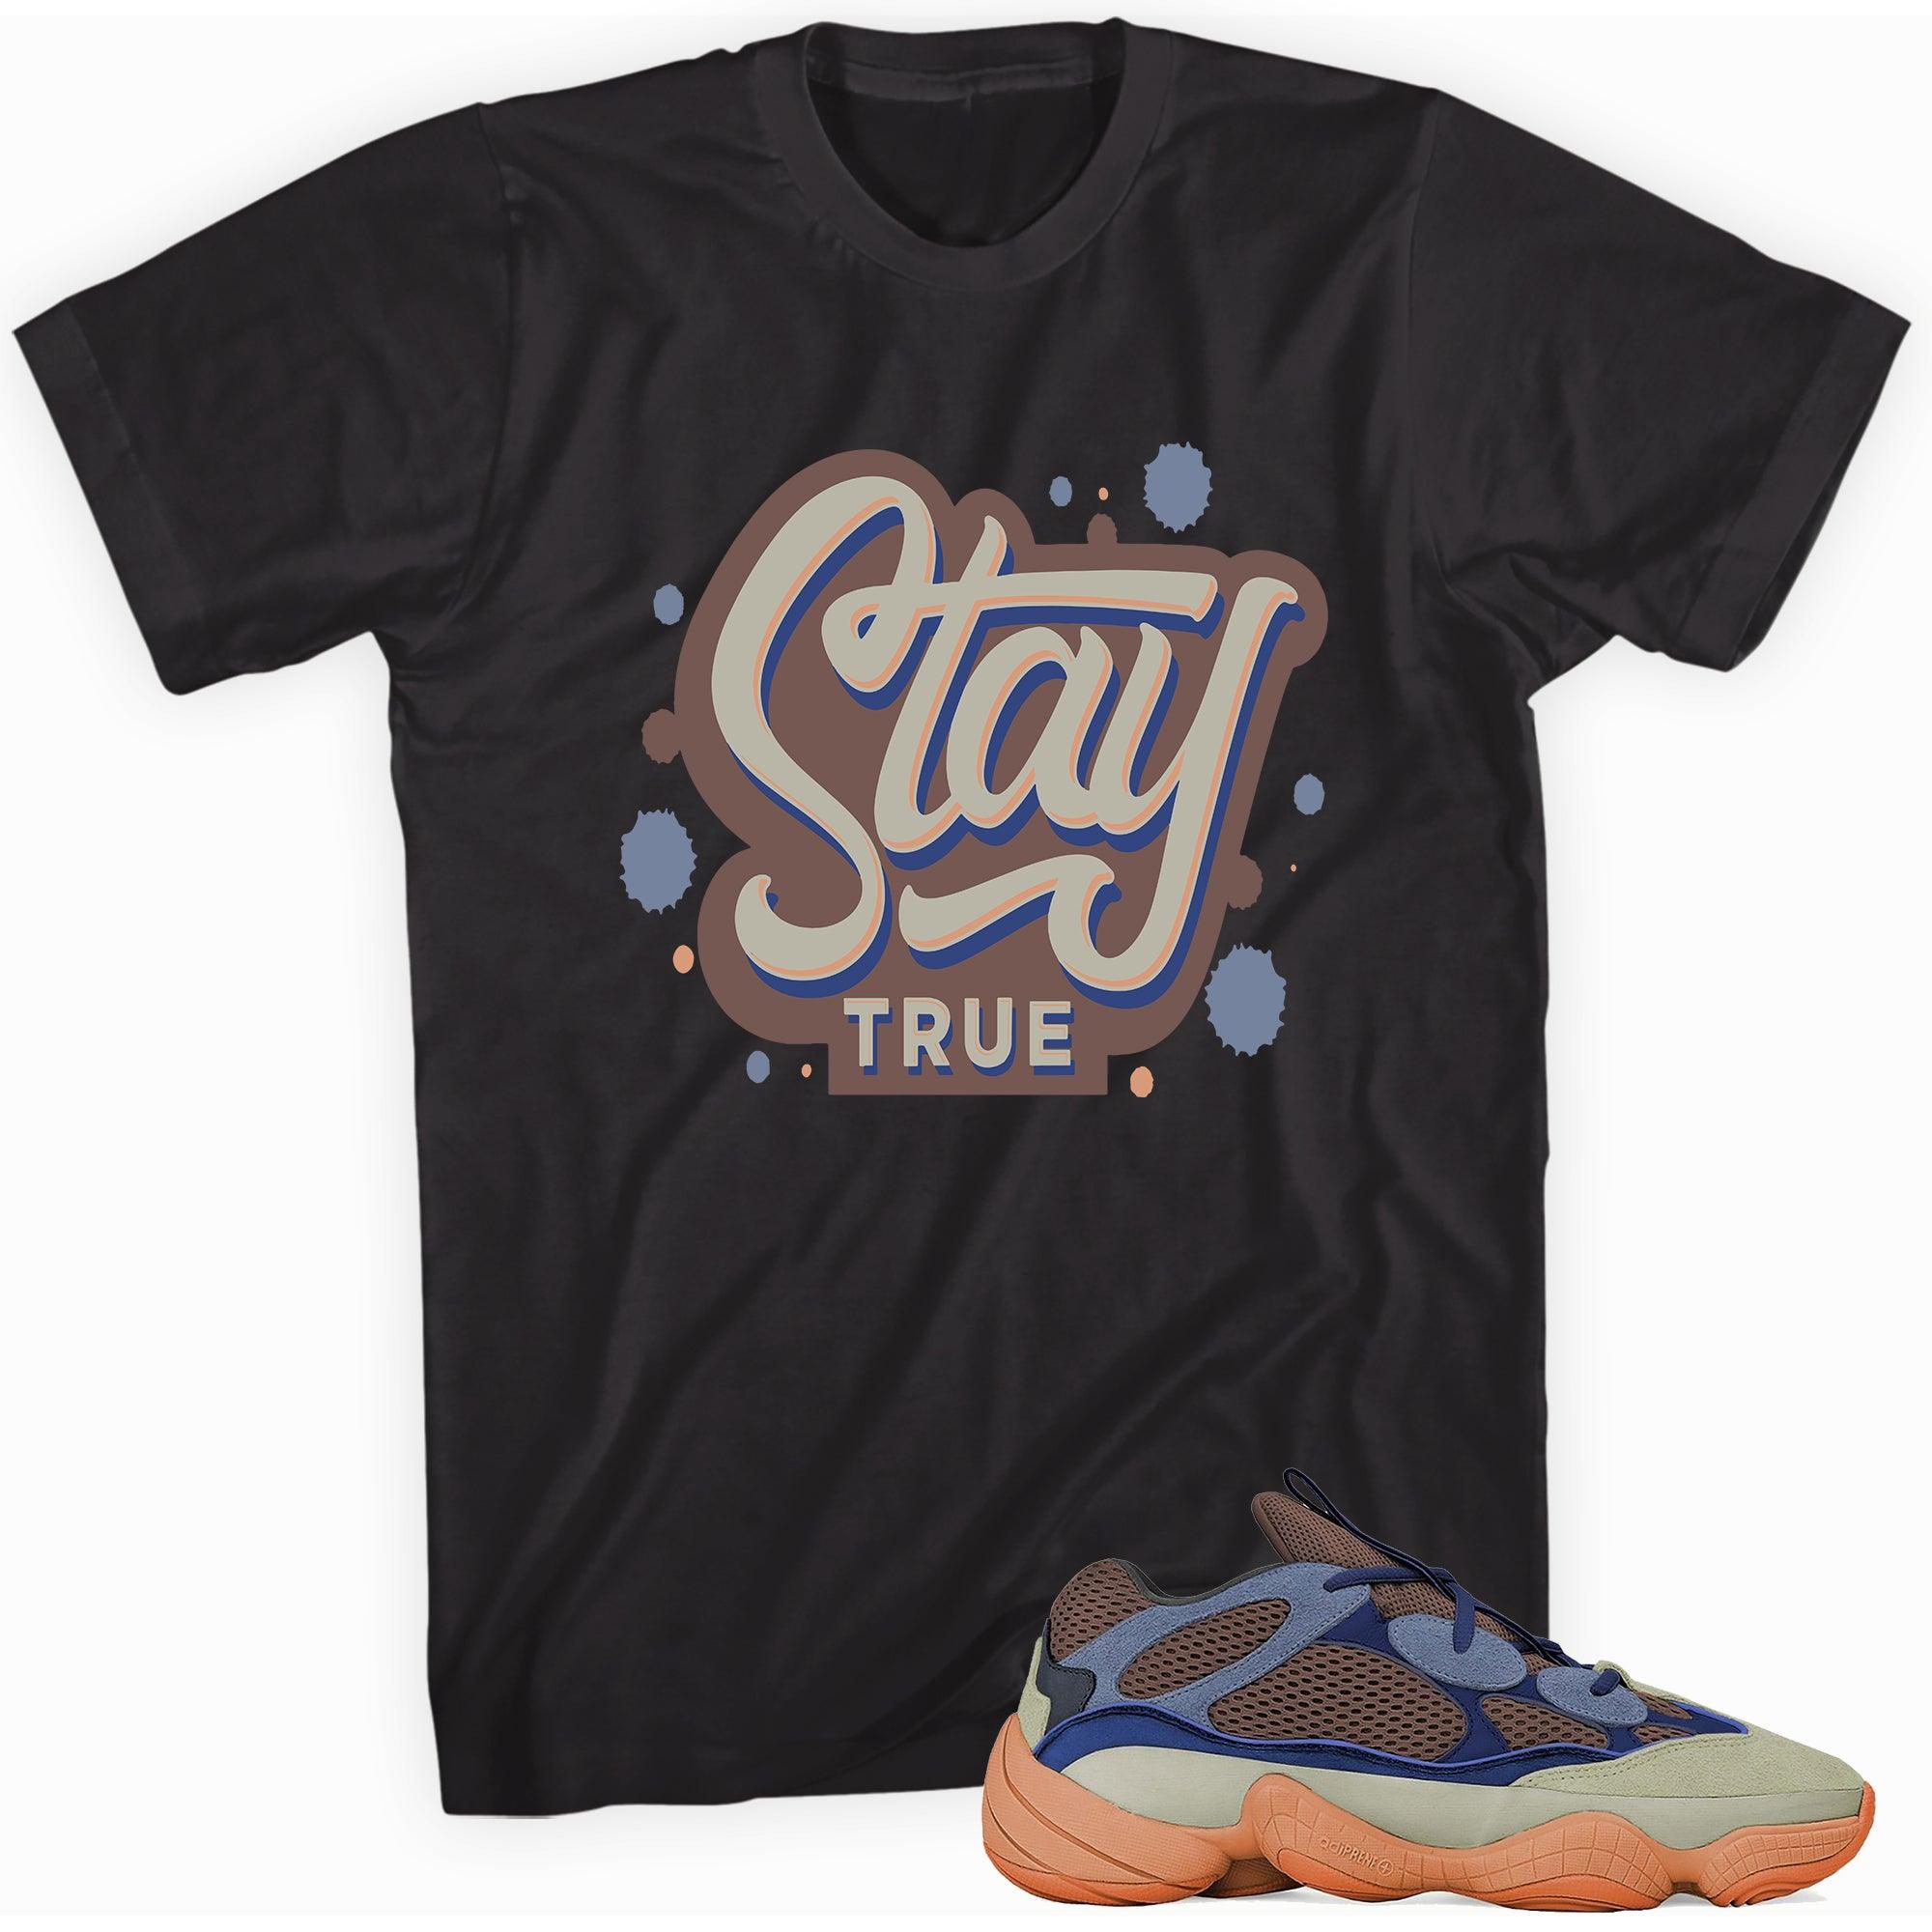 Stay True Shirt Yeezy 500 Enflame photo